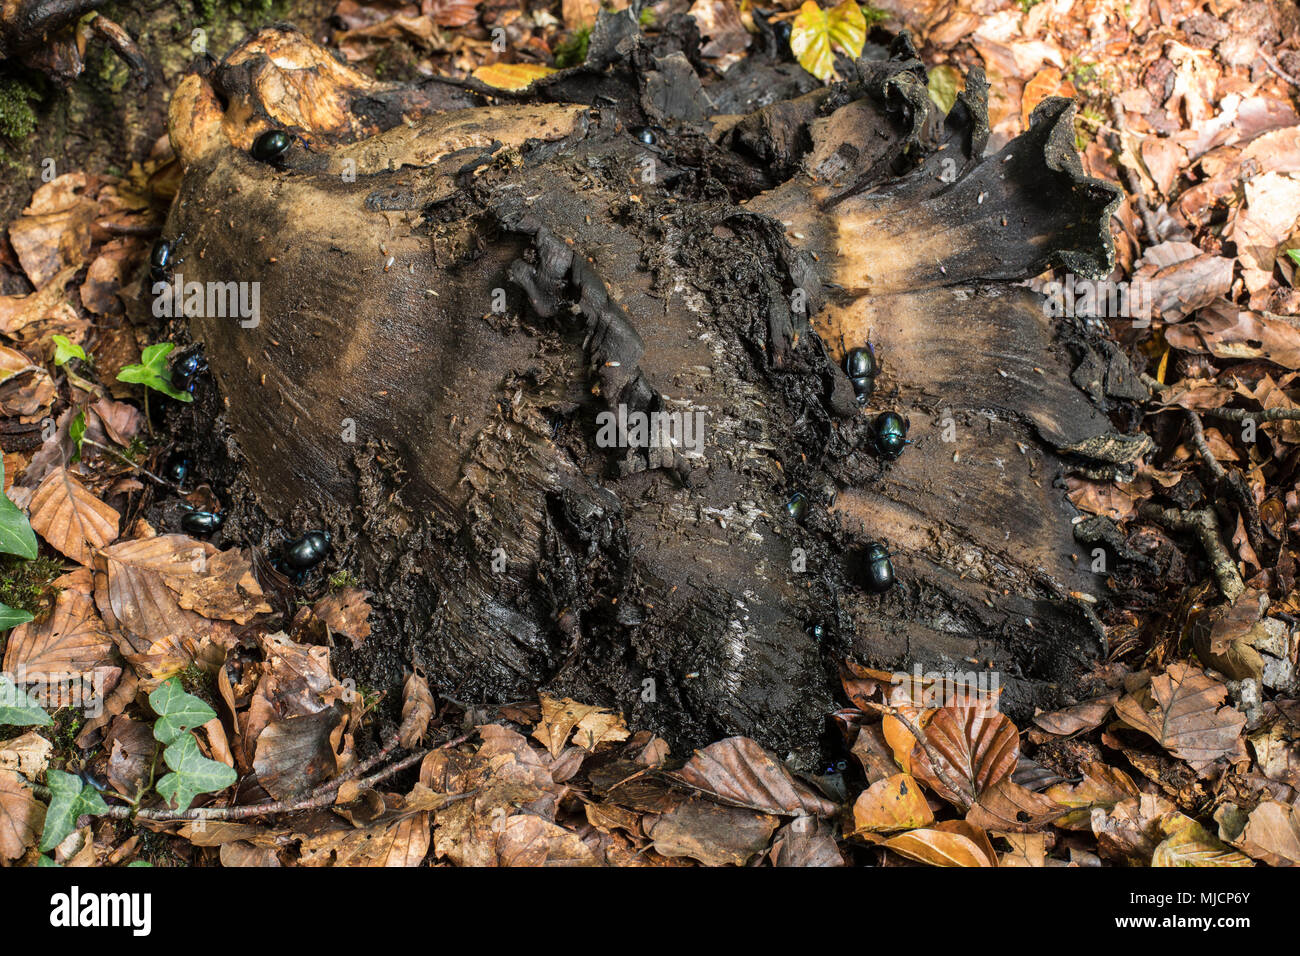 Forest dung beetle, Anoplotrupes stercorosus, sui morti polypore gigante Foto Stock